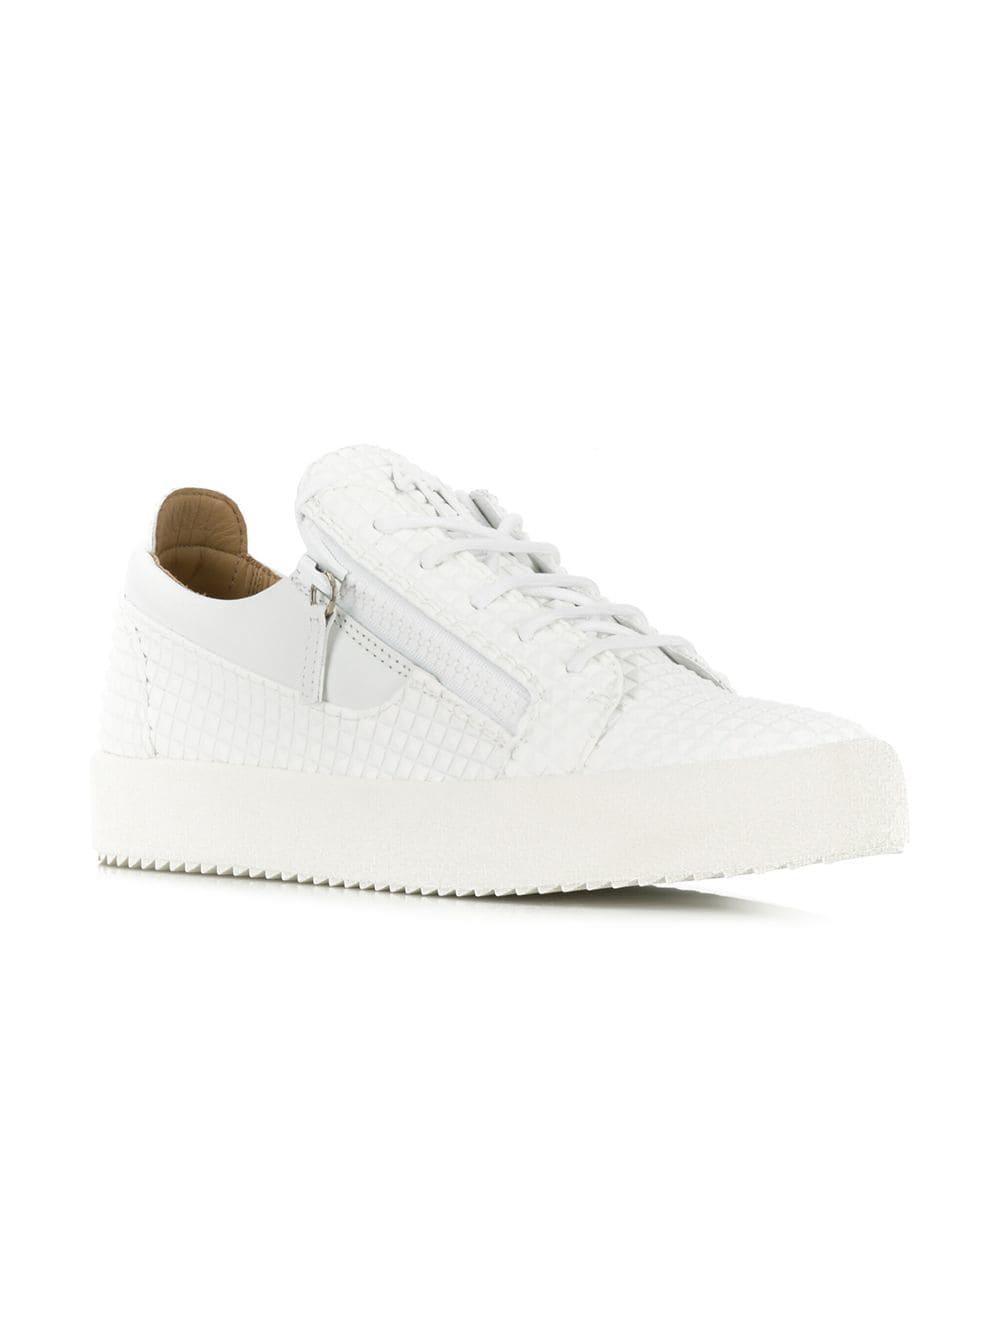 Giuseppe Zanotti Leather Low-top Sneakers in White for Men - Save 39% ...